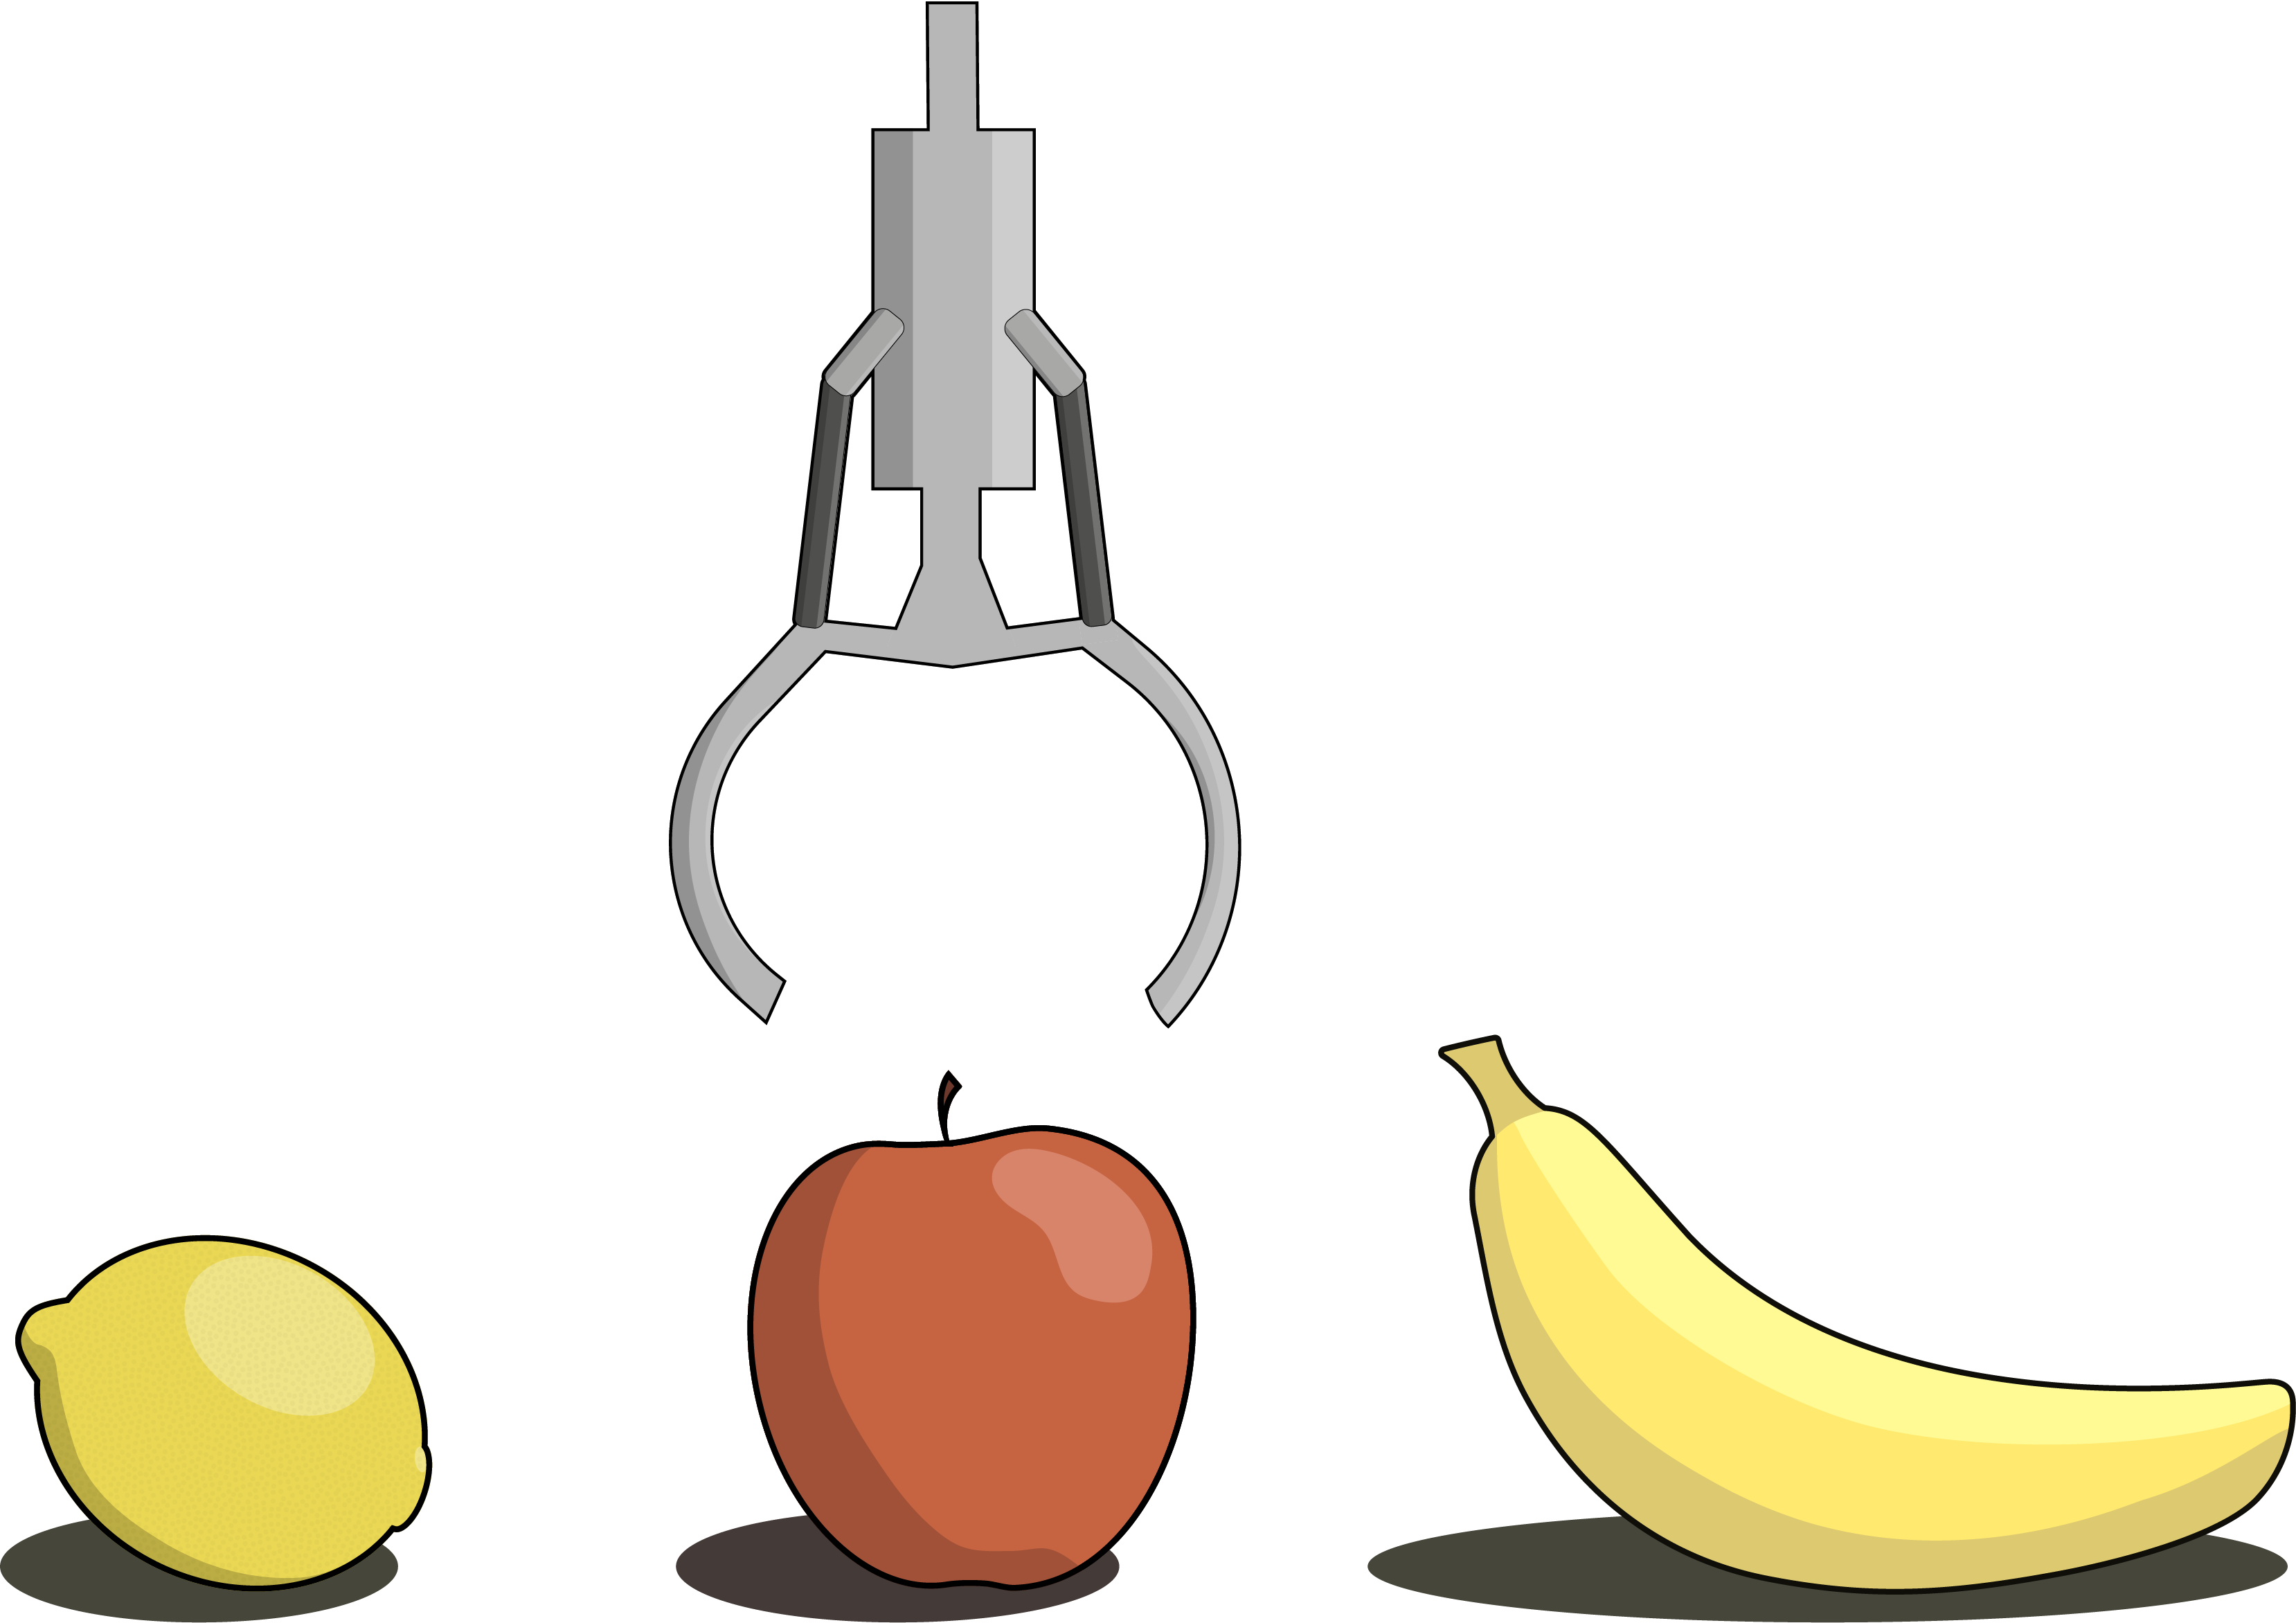 A claw drops down from out of the frame, seemingly about to pick up the apple, but not the banana or the lemon.